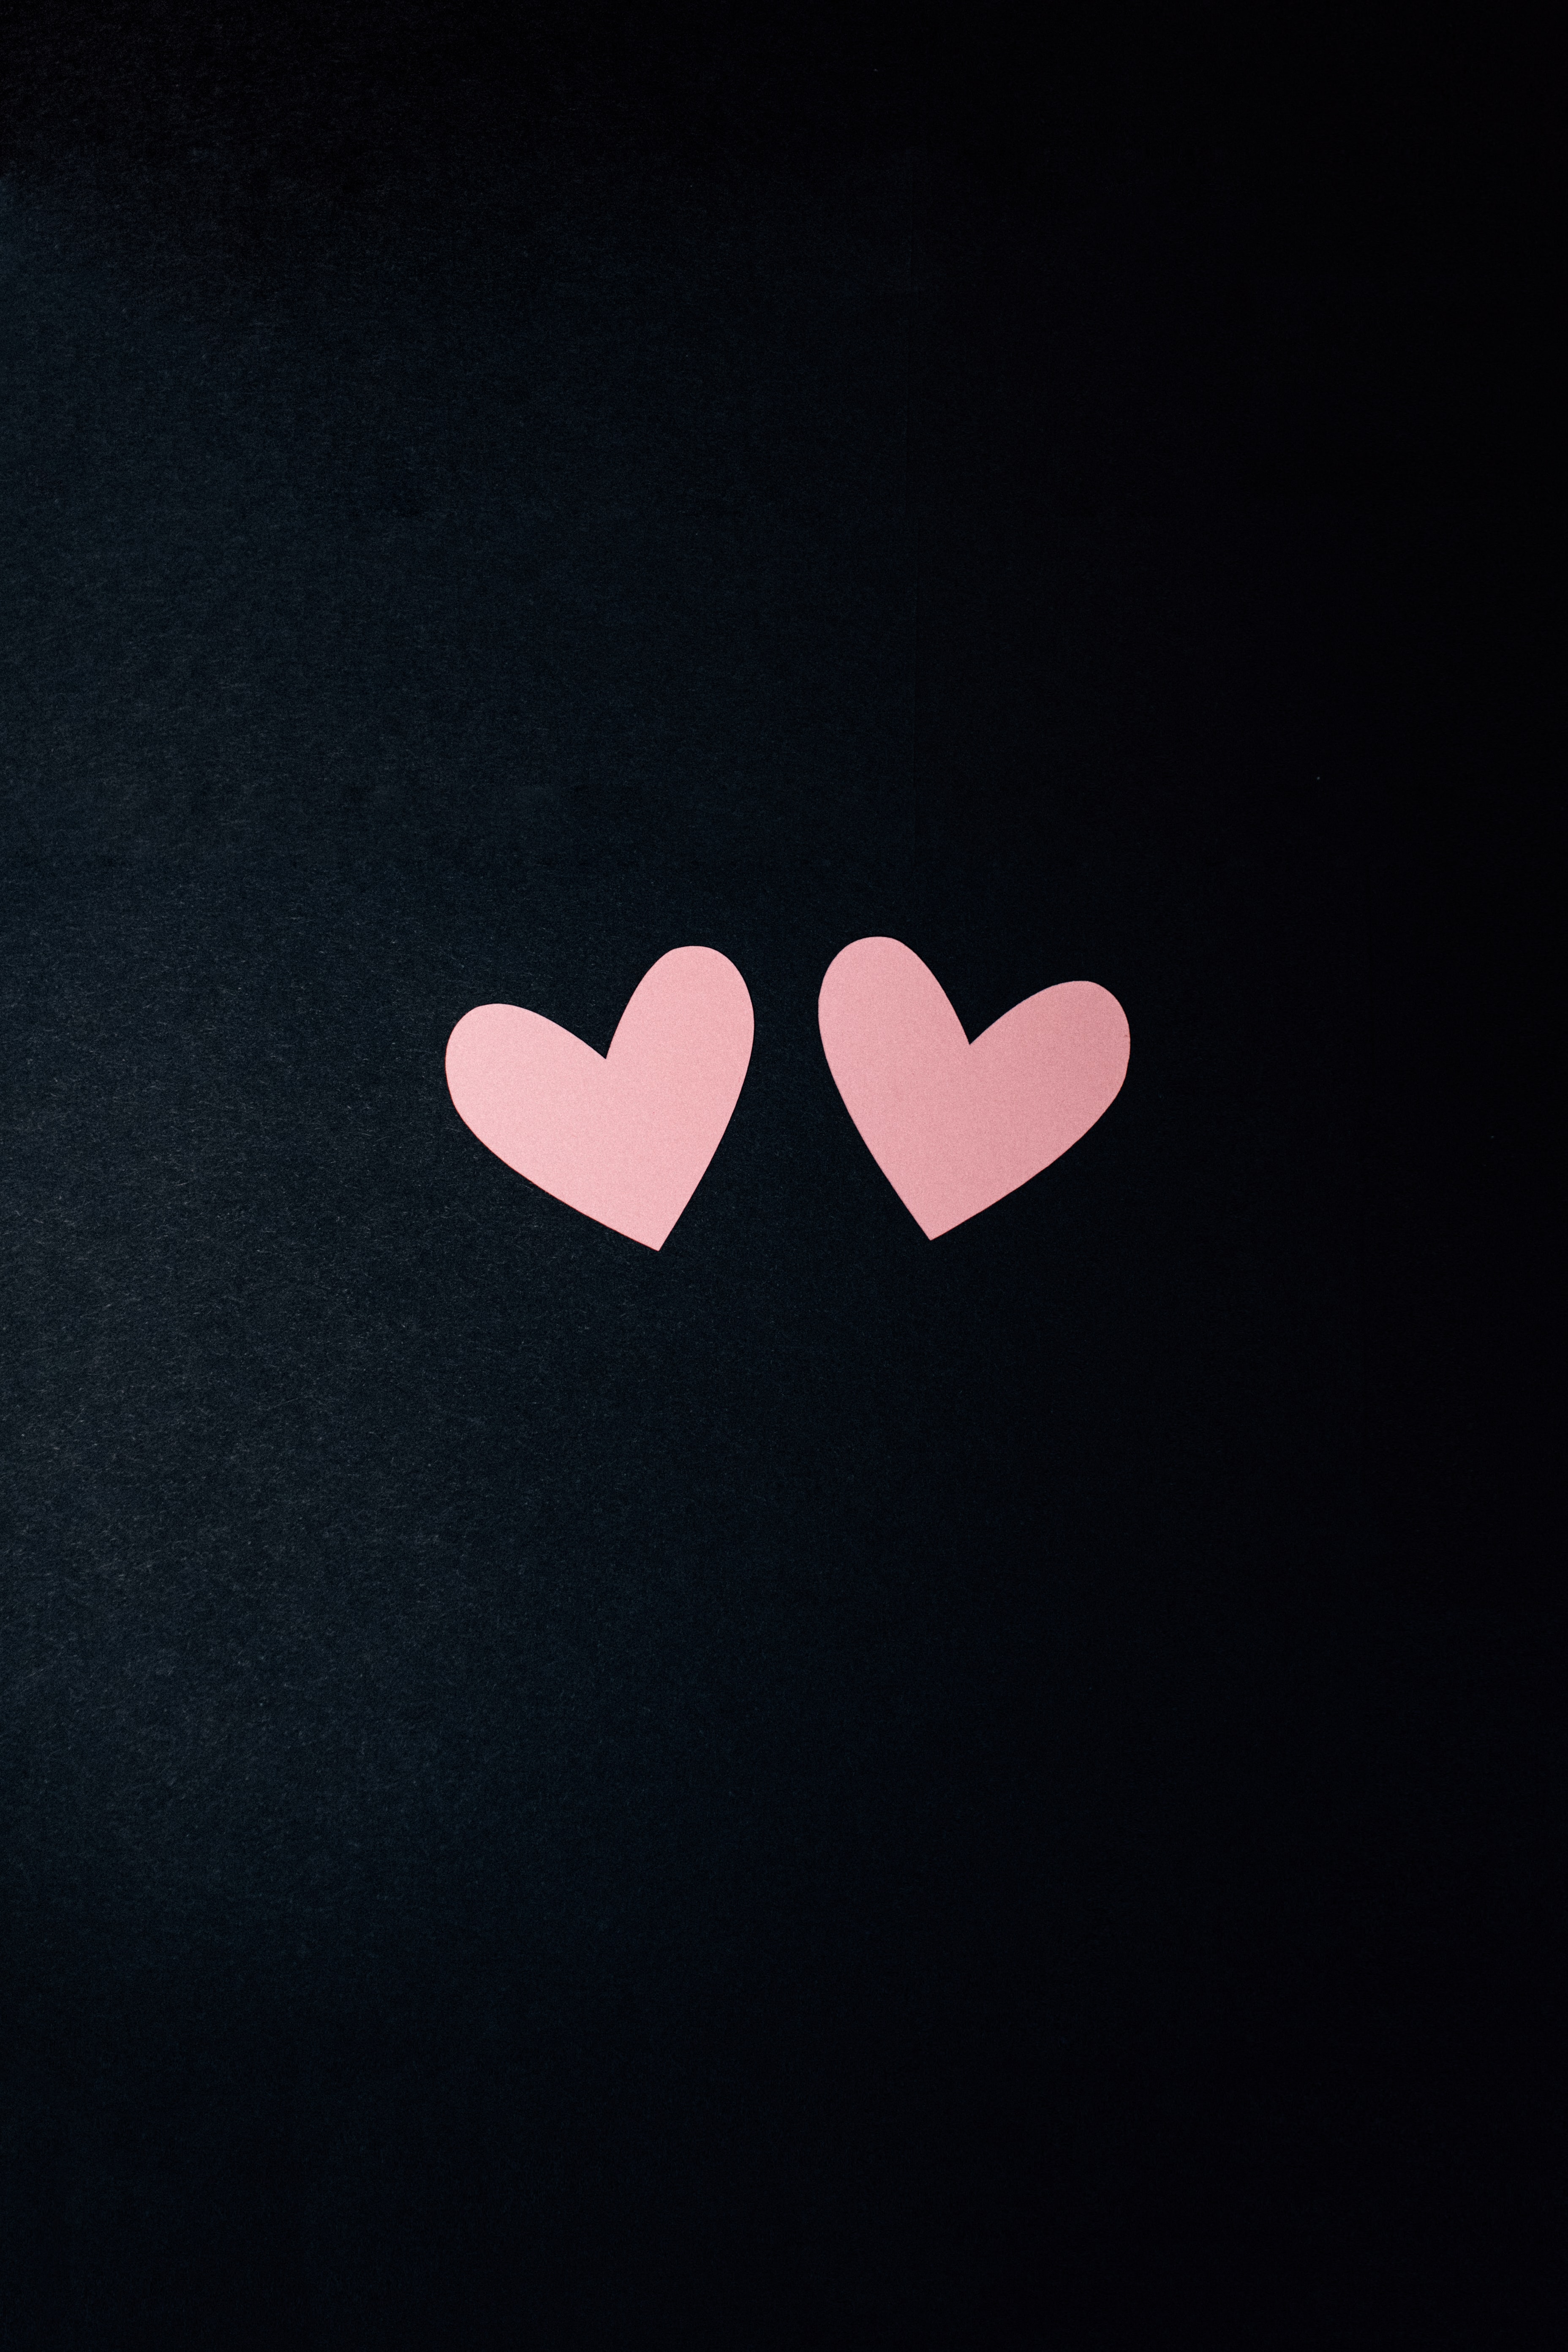 69994 download wallpaper hearts, love, minimalism screensavers and pictures for free